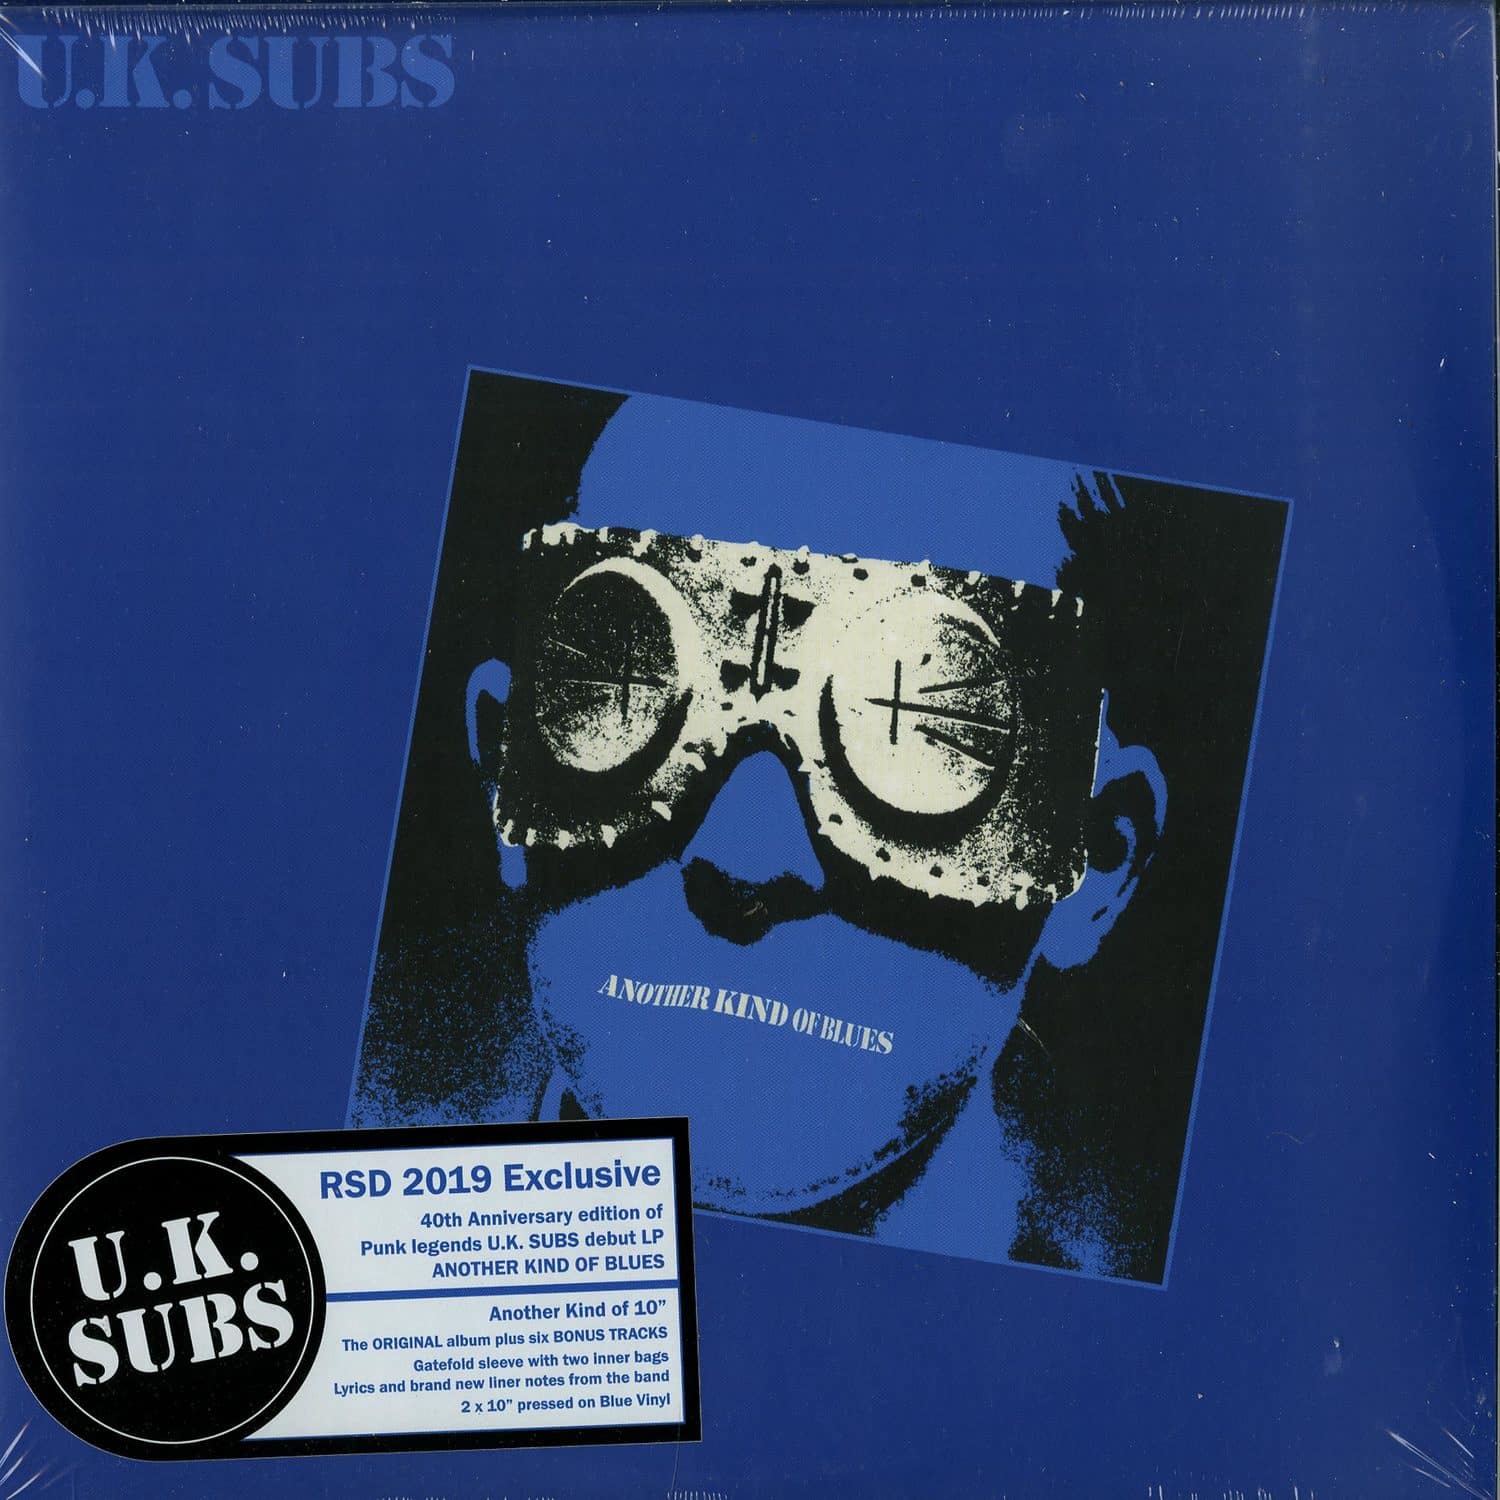 UK Subs - ANOTHER KIND OF BLUES 